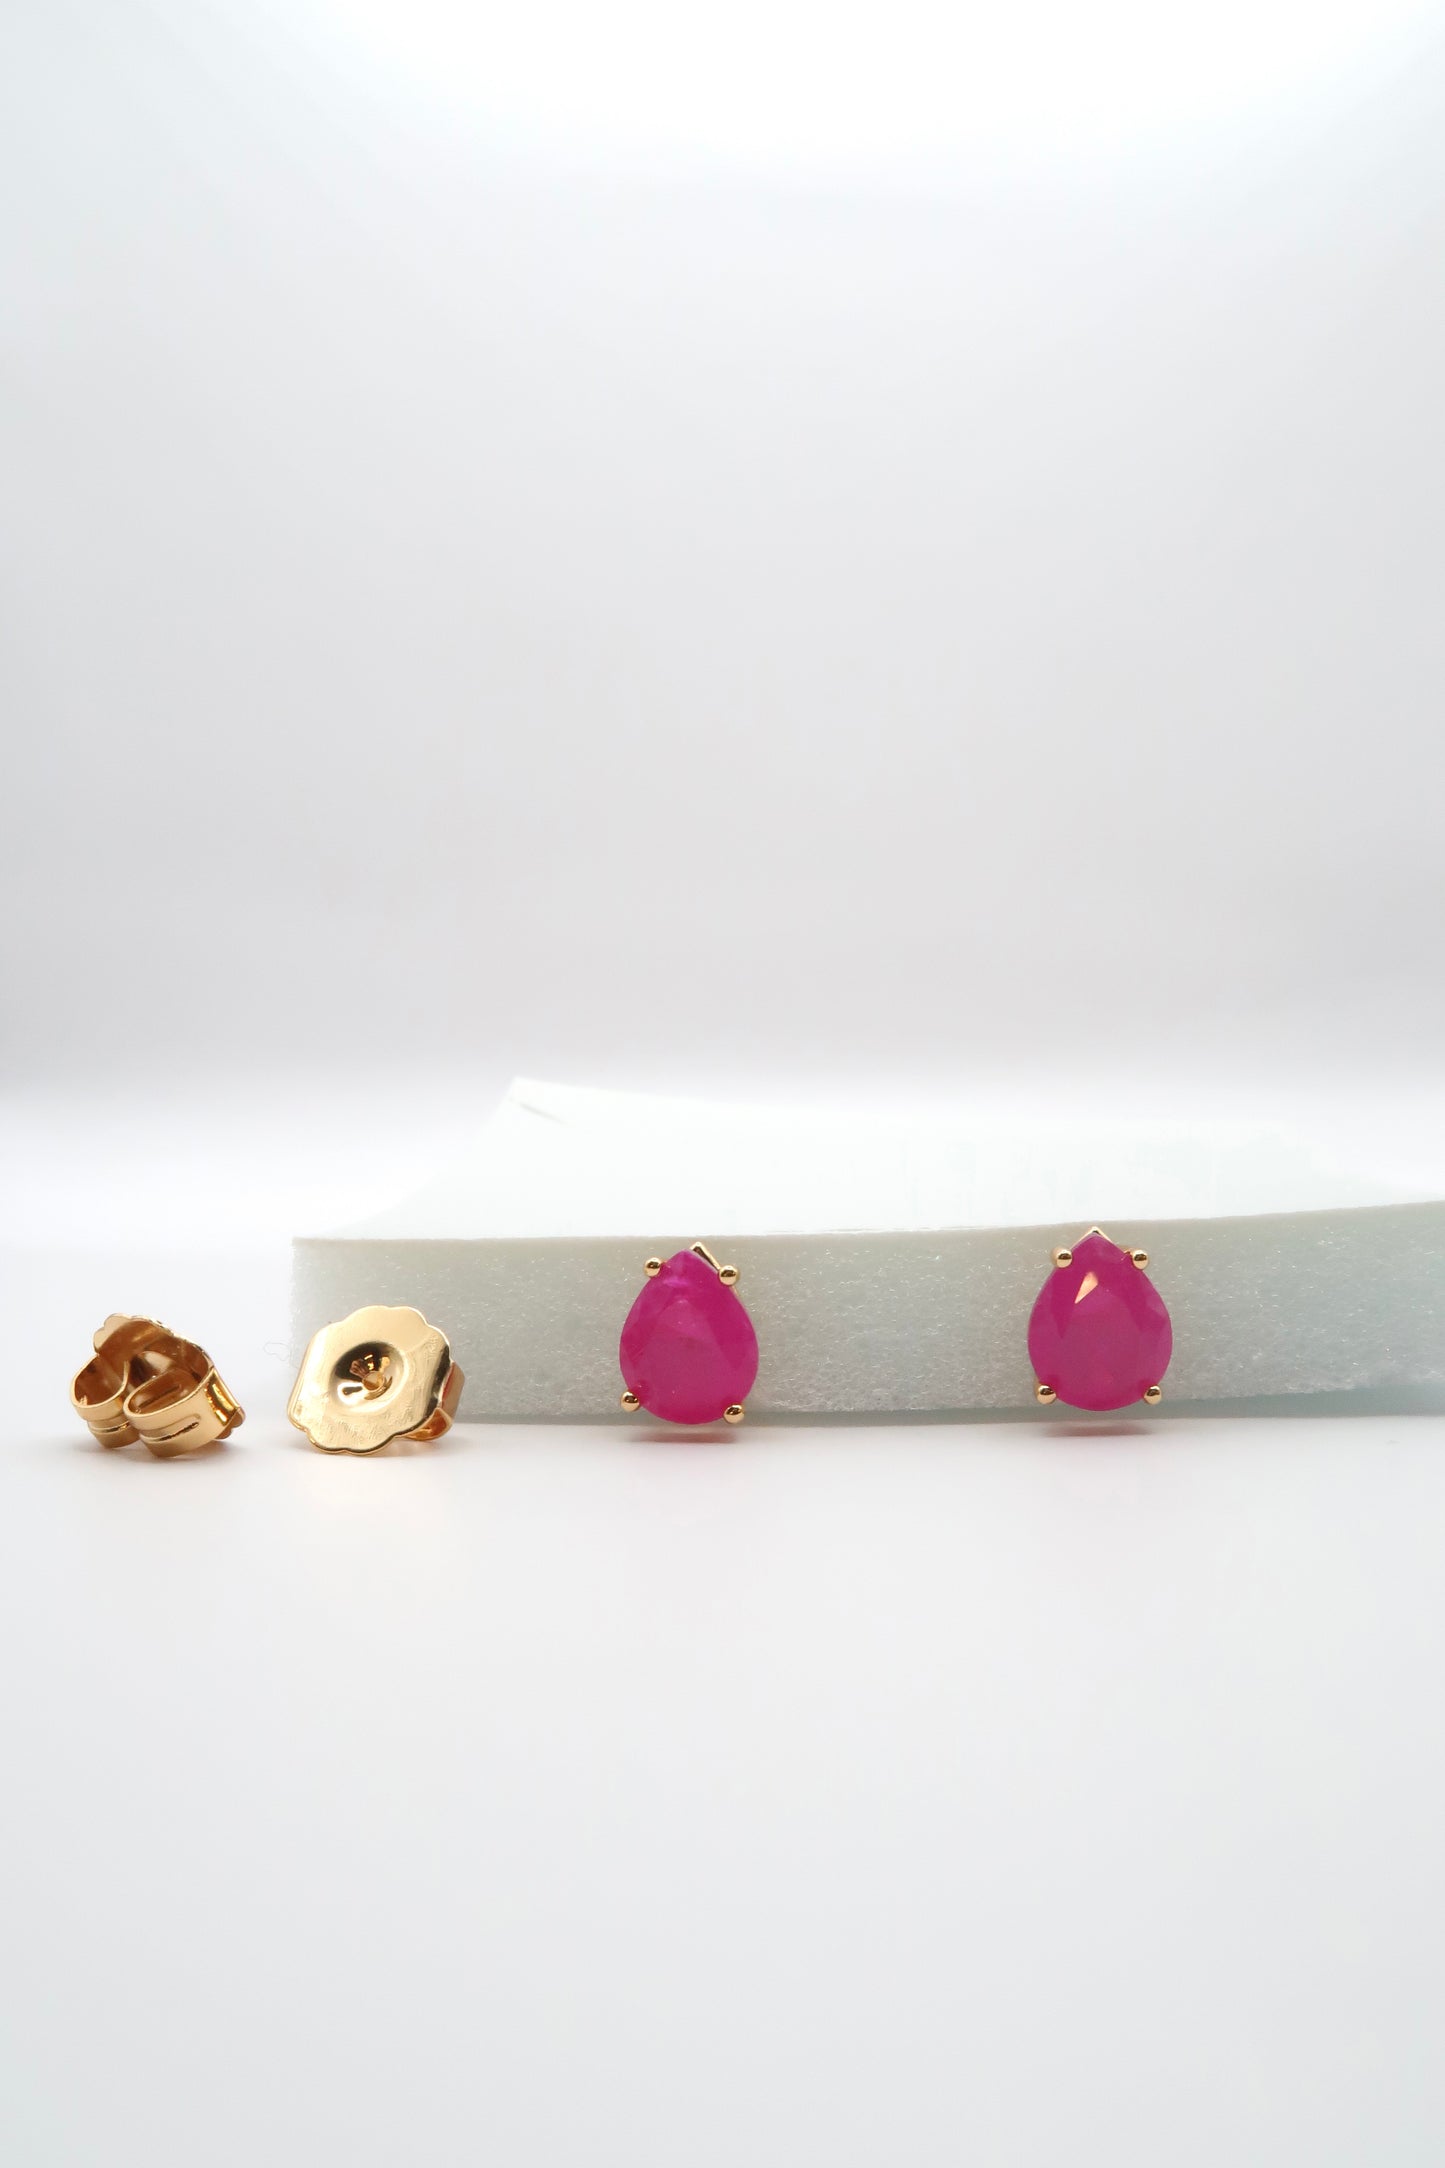 Earring crystal drops - gold plated